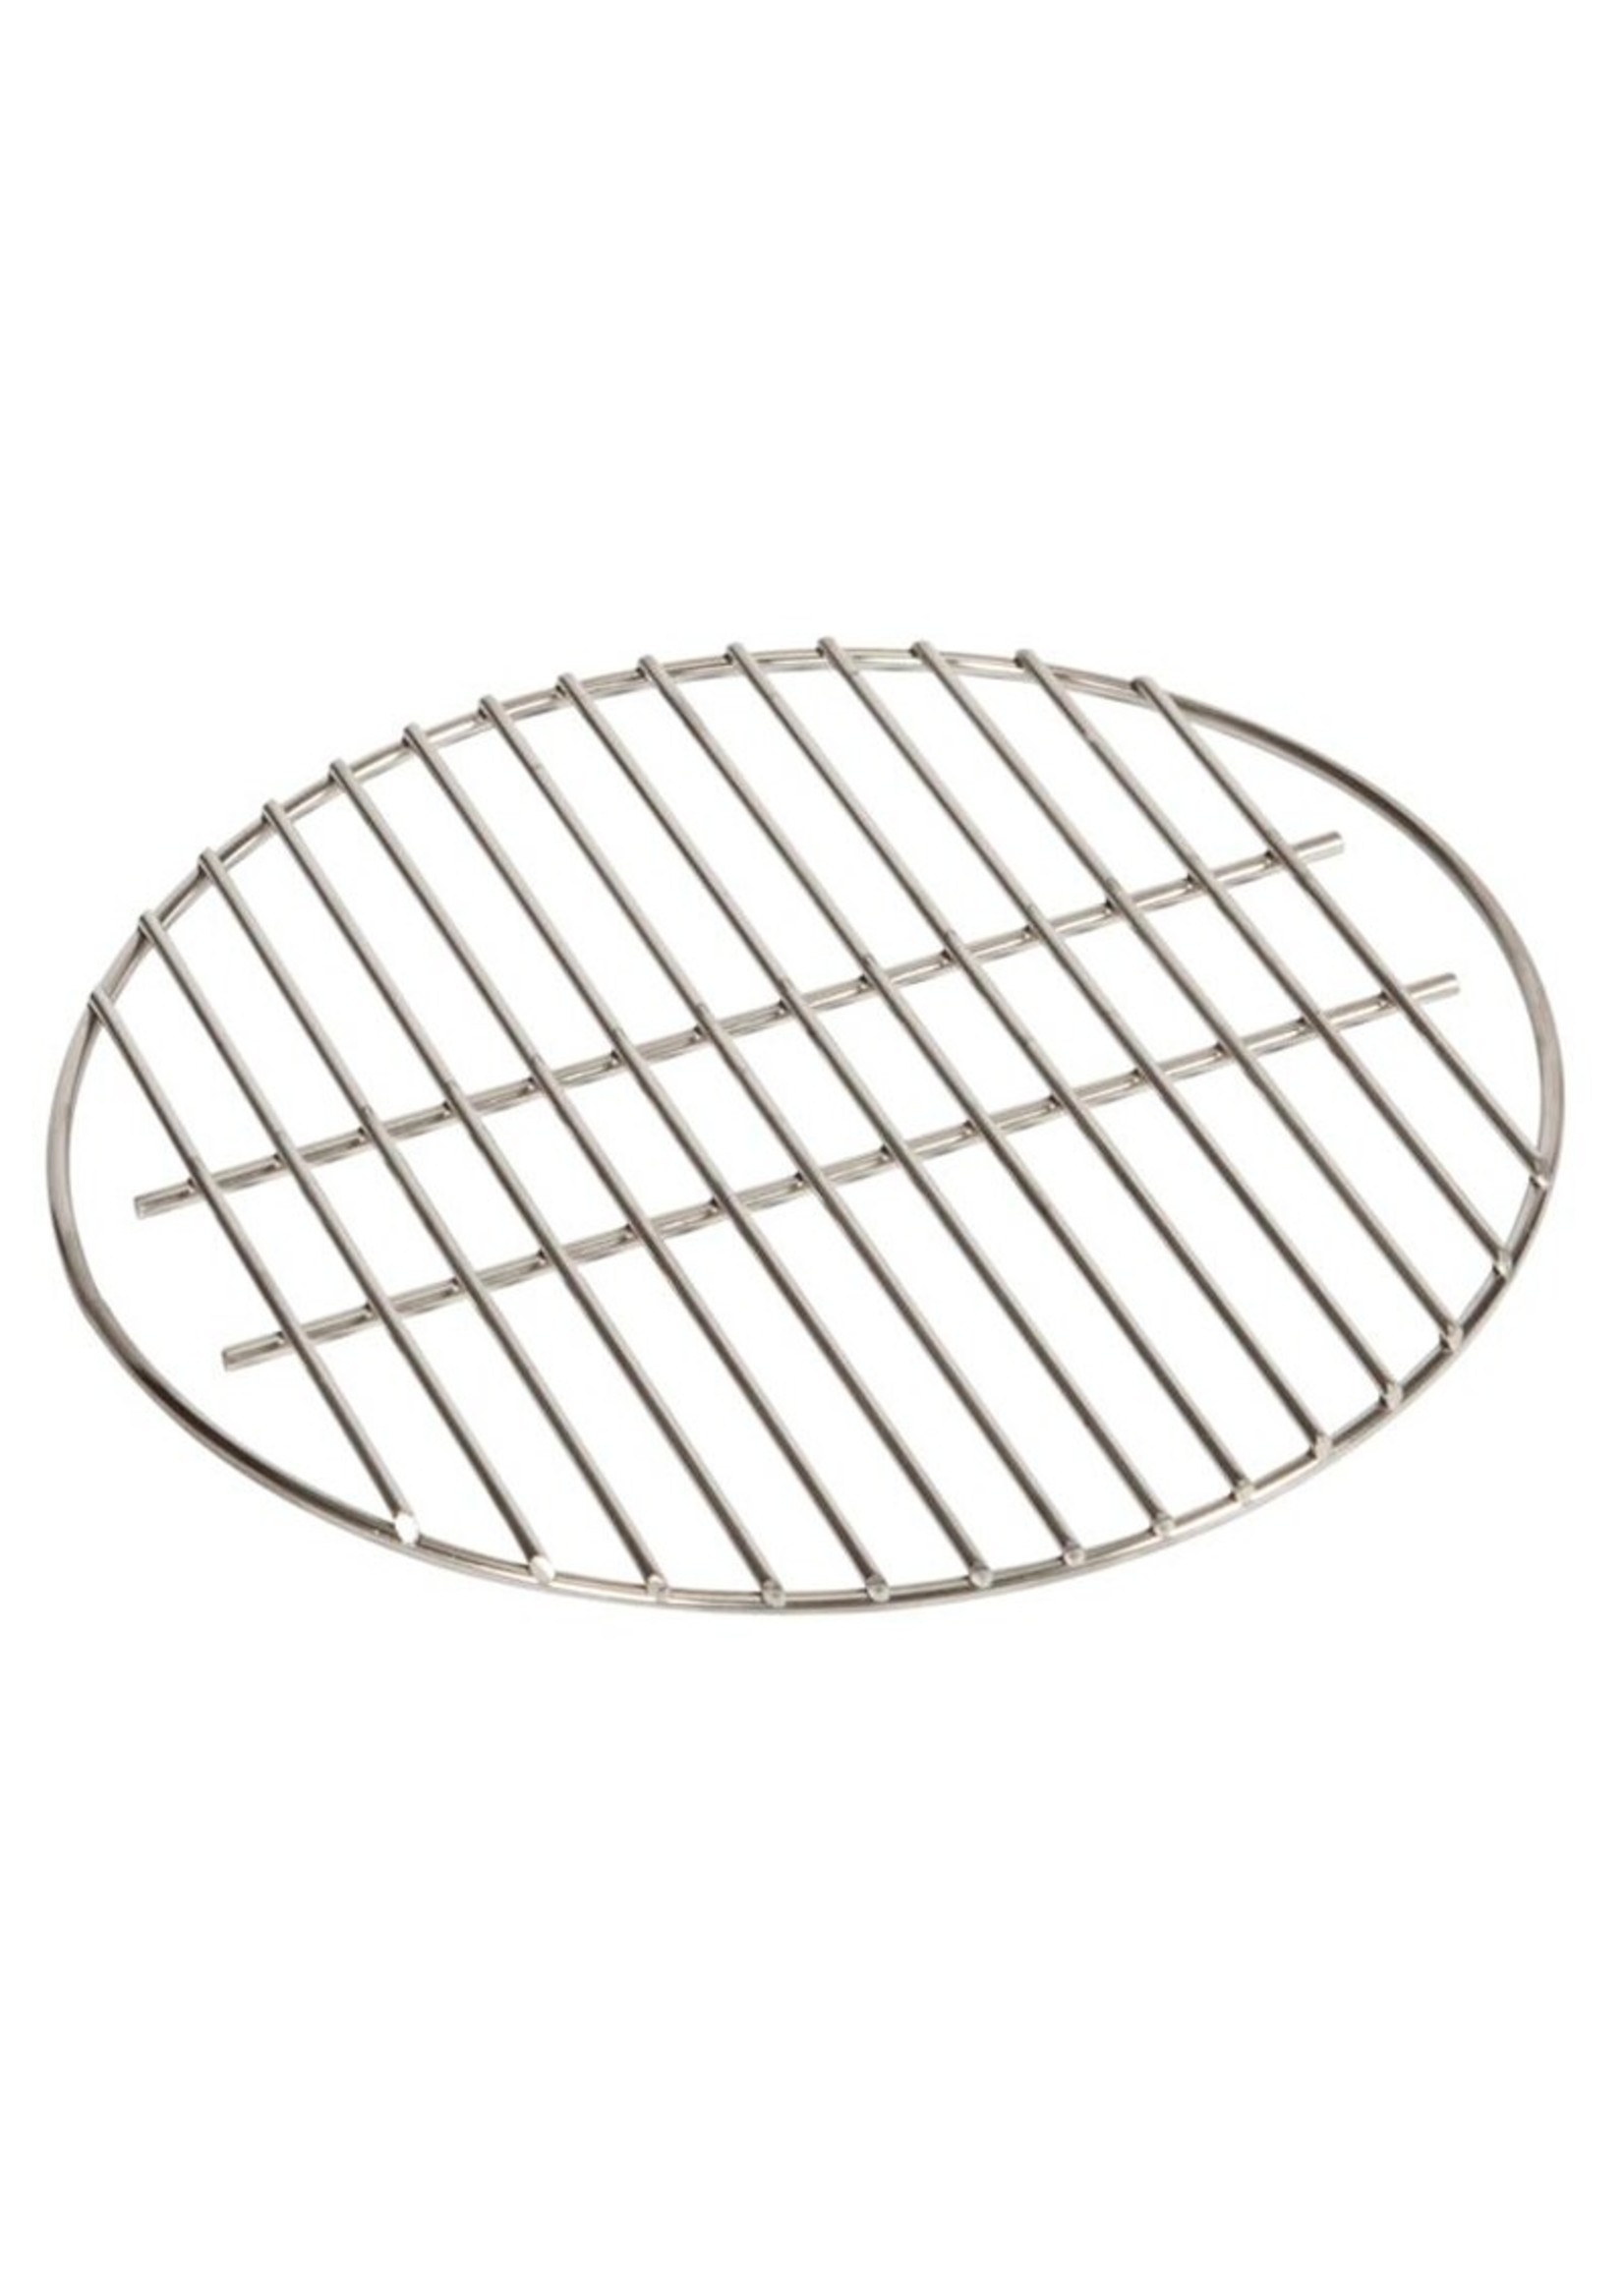 Big Green Egg BGE 10in Stainless Steel Grid - MN